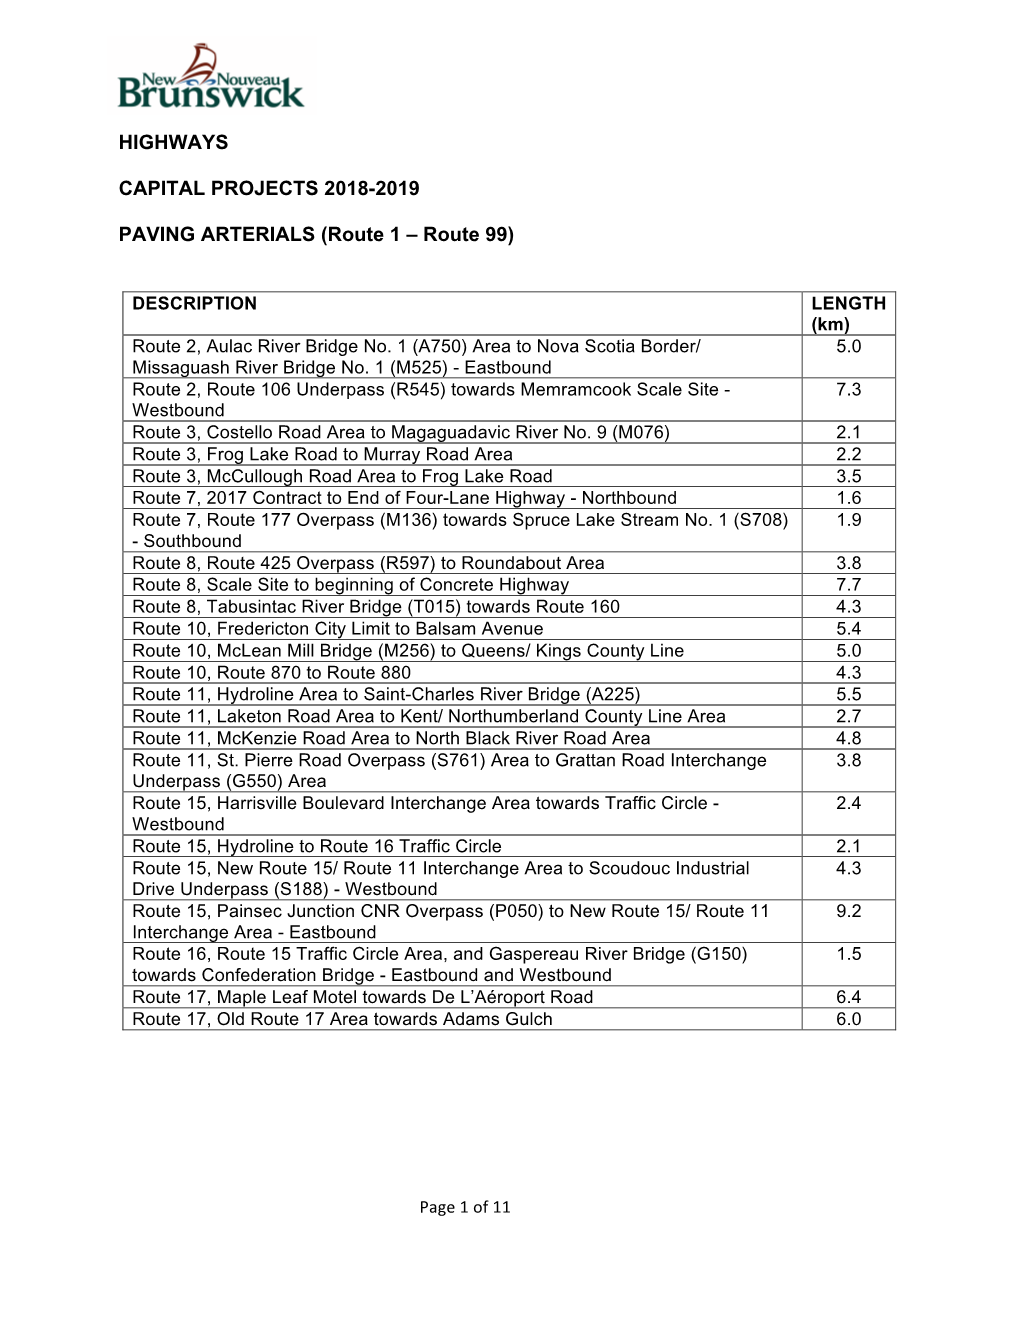 Highways Capital Projects 2018-2019 Paving Arterials